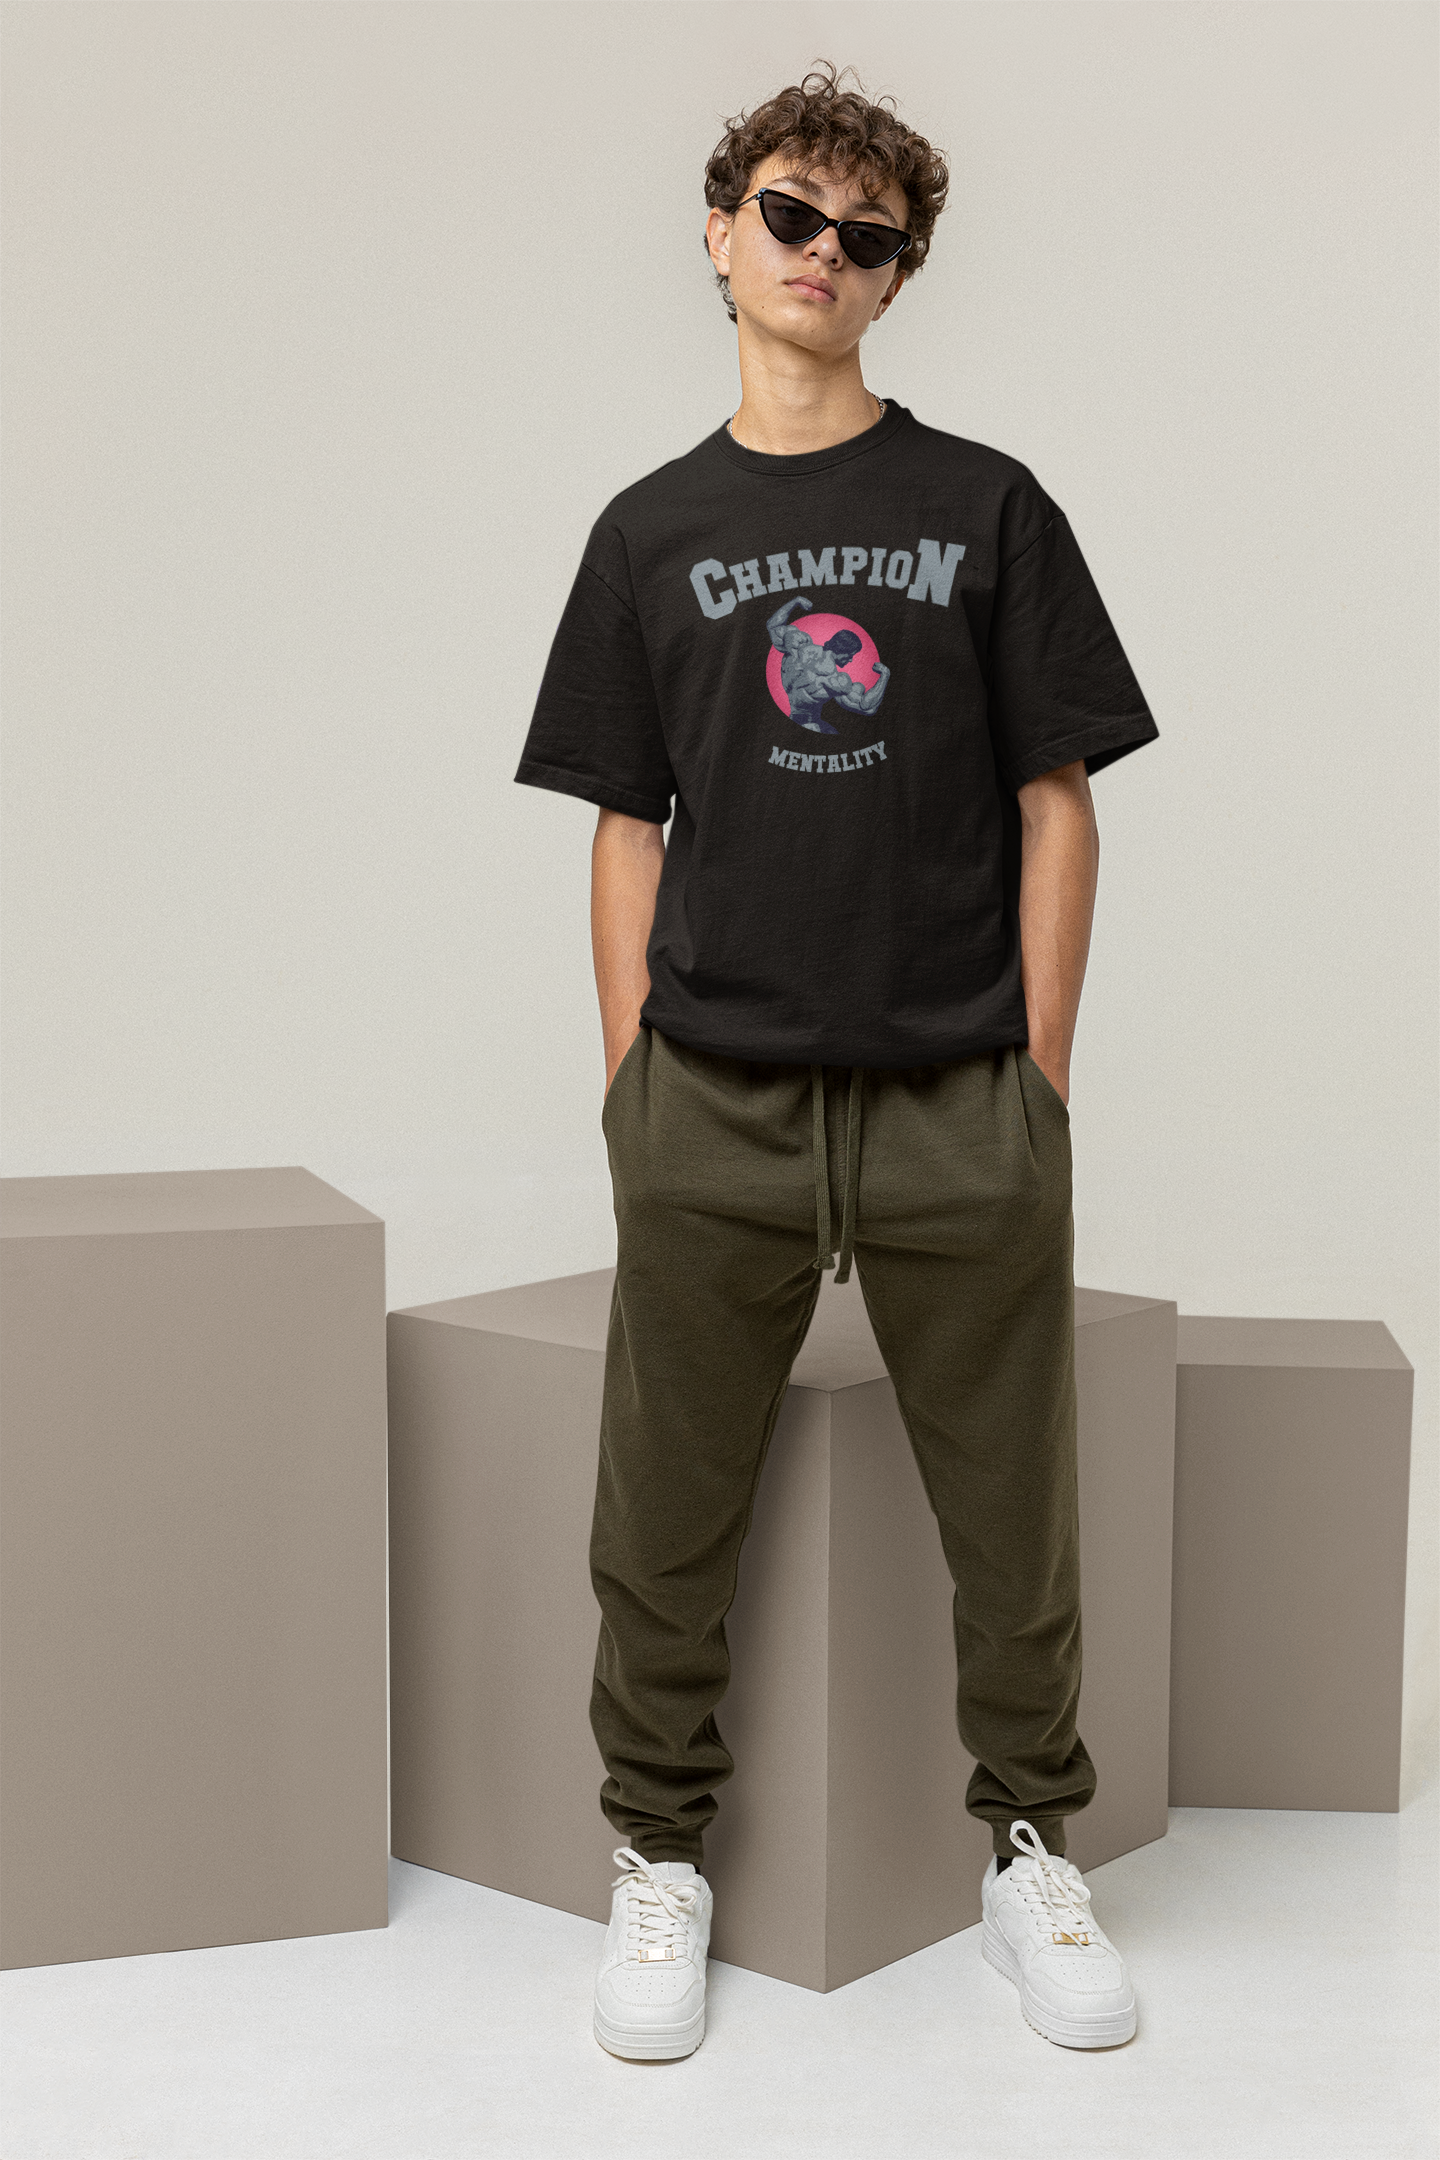 Champion Mentality - Gym Oversized T Shirt Strong Soul Shirts & Tops